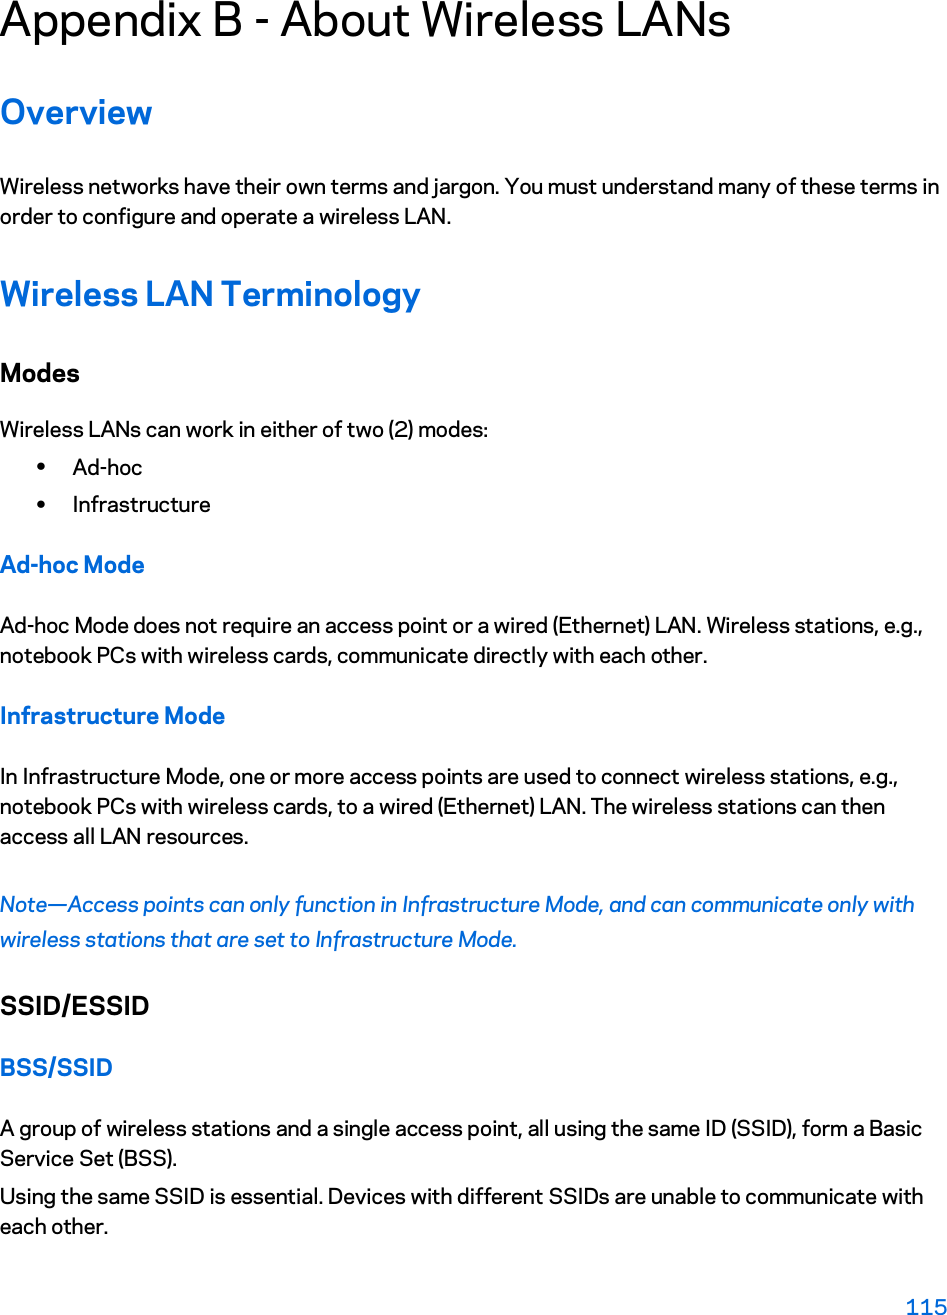 Appendix B - About Wireless LANs Overview Wireless networks have their own terms and jargon. You must understand many of these terms in order to configure and operate a wireless LAN. Wireless LAN Terminology Modes Wireless LANs can work in either of two (2) modes: xAd-hoc xInfrastructure Ad-hoc Mode Ad-hoc Mode does not require an access point or a wired (Ethernet) LAN. Wireless stations, e.g., notebook PCs with wireless cards, communicate directly with each other. Infrastructure Mode In Infrastructure Mode, one or more access points are used to connect wireless stations, e.g., notebook PCs with wireless cards, to a wired (Ethernet) LAN. The wireless stations can then access all LAN resources. Note—Access points can only function in Infrastructure Mode, and can communicate only with wireless stations that are set to Infrastructure Mode. SSID/ESSID BSS/SSID A group of wireless stations and a single access point, all using the same ID (SSID), form a Basic Service Set (BSS). Using the same SSID is essential. Devices with different SSIDs are unable to communicate with each other.  115 